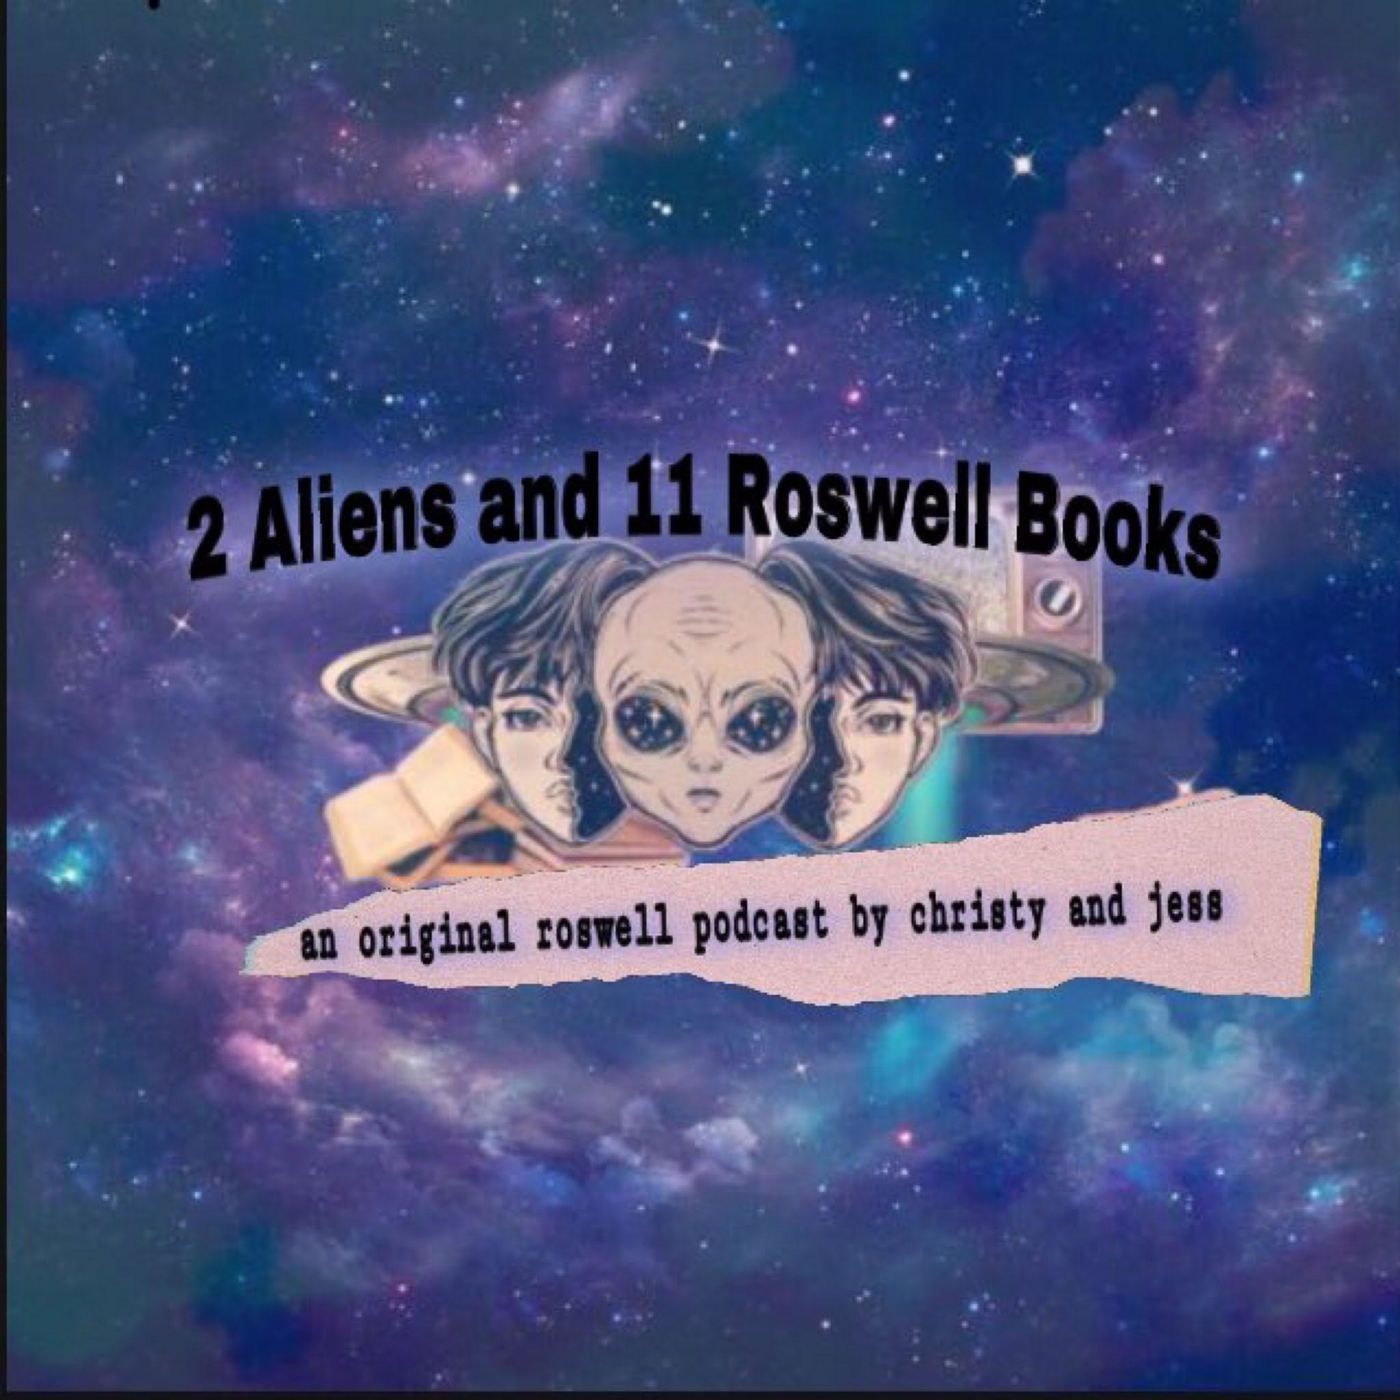 2 Aliens and 11 Roswell Books